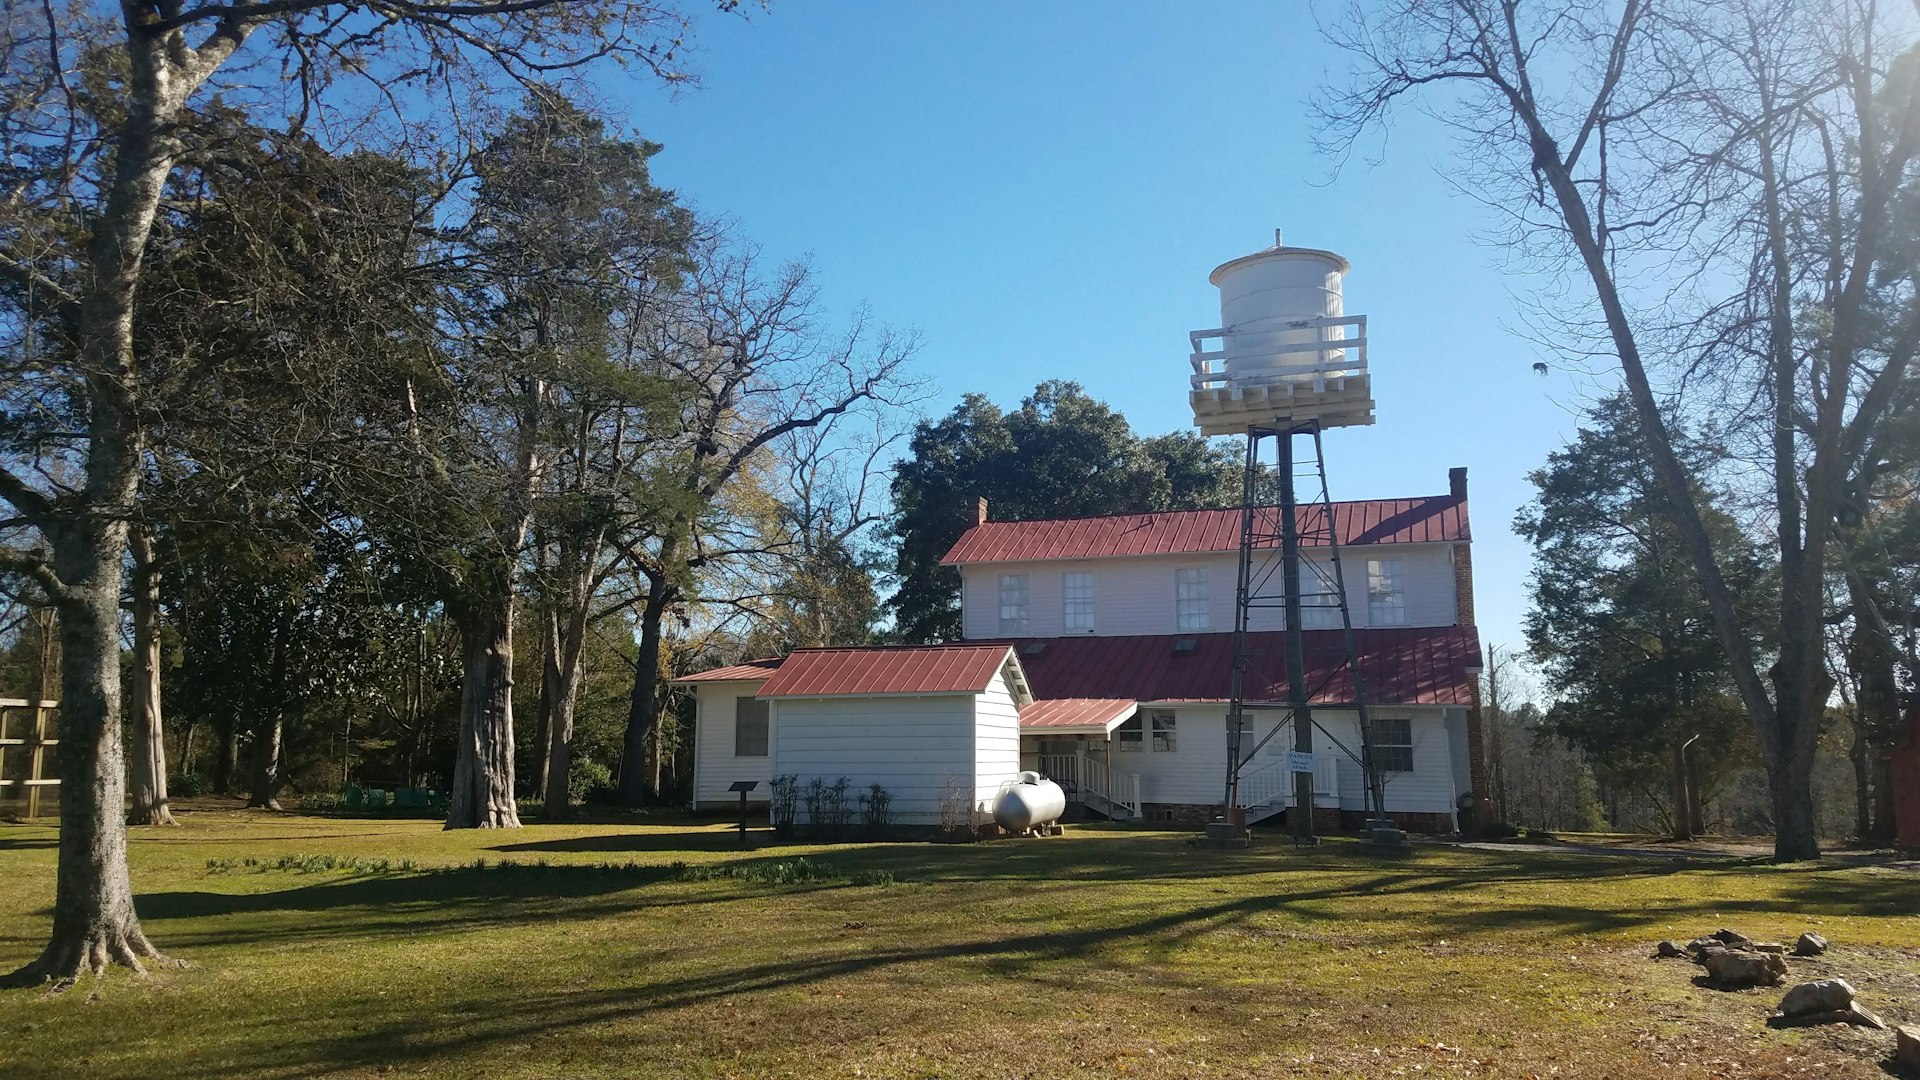 The Andalusia farmhouse water tower and outbuildings